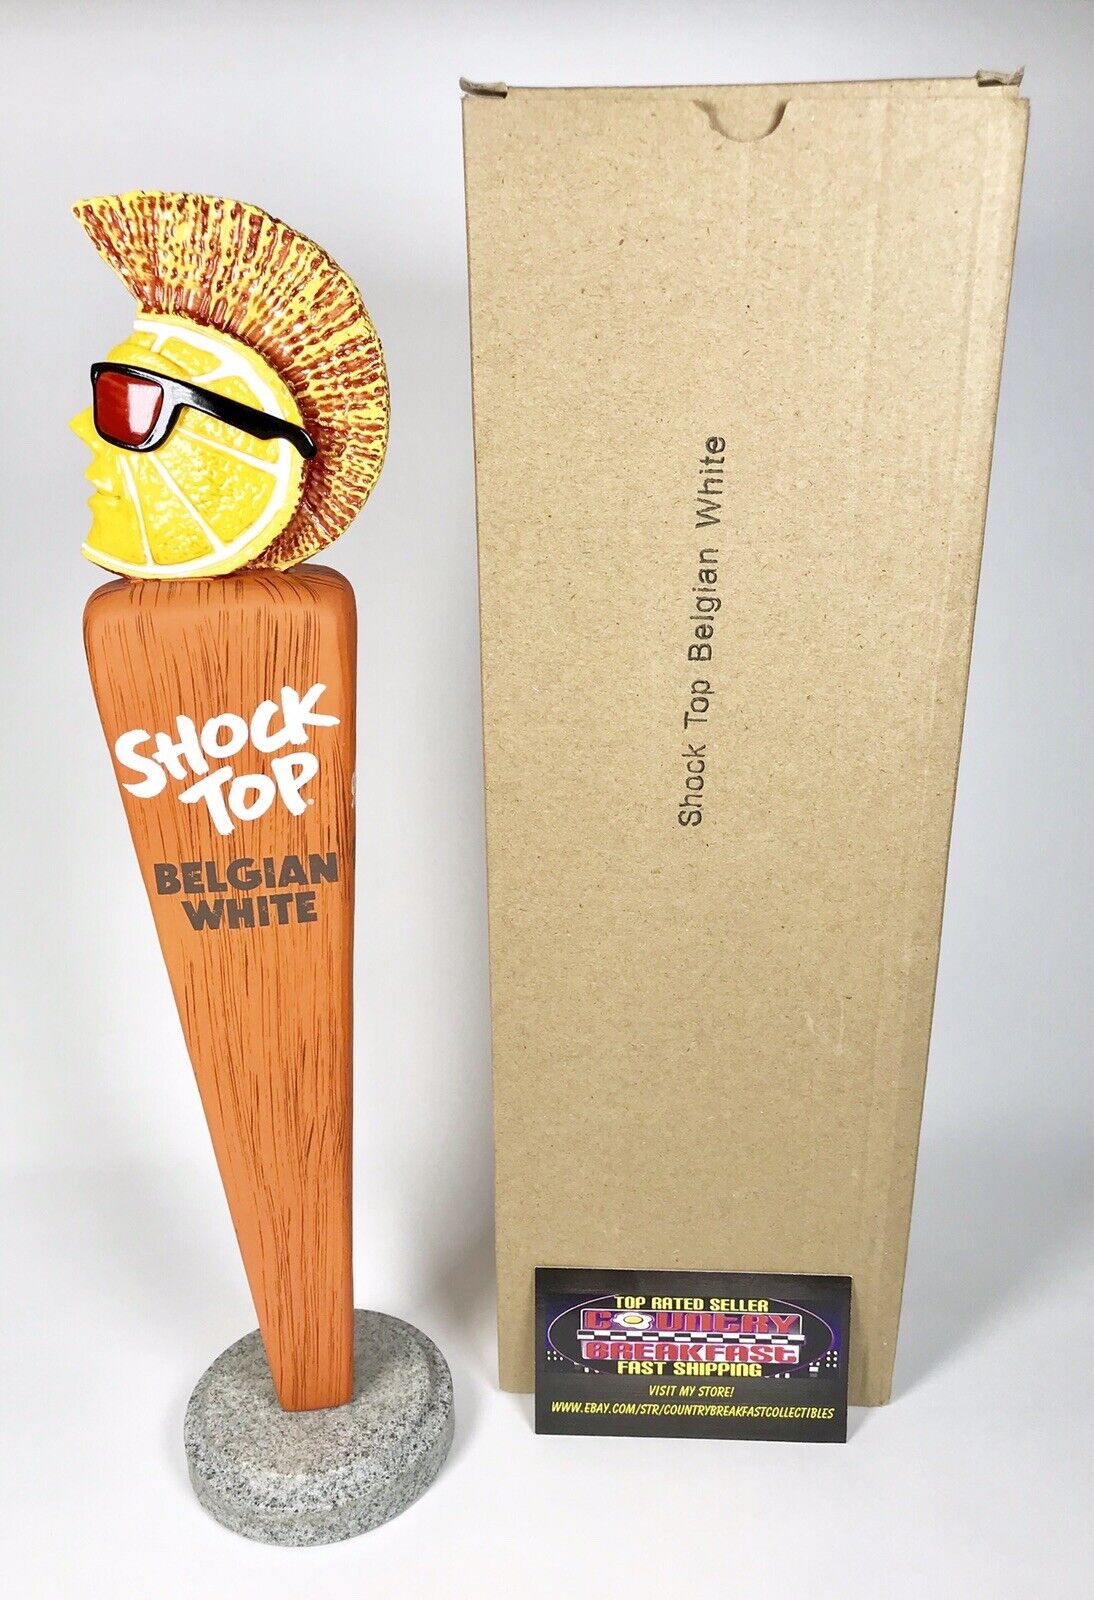 Shock Top Belgian White Mohawk Dude Beer Tap Handle 12” Tall Brand New In Box